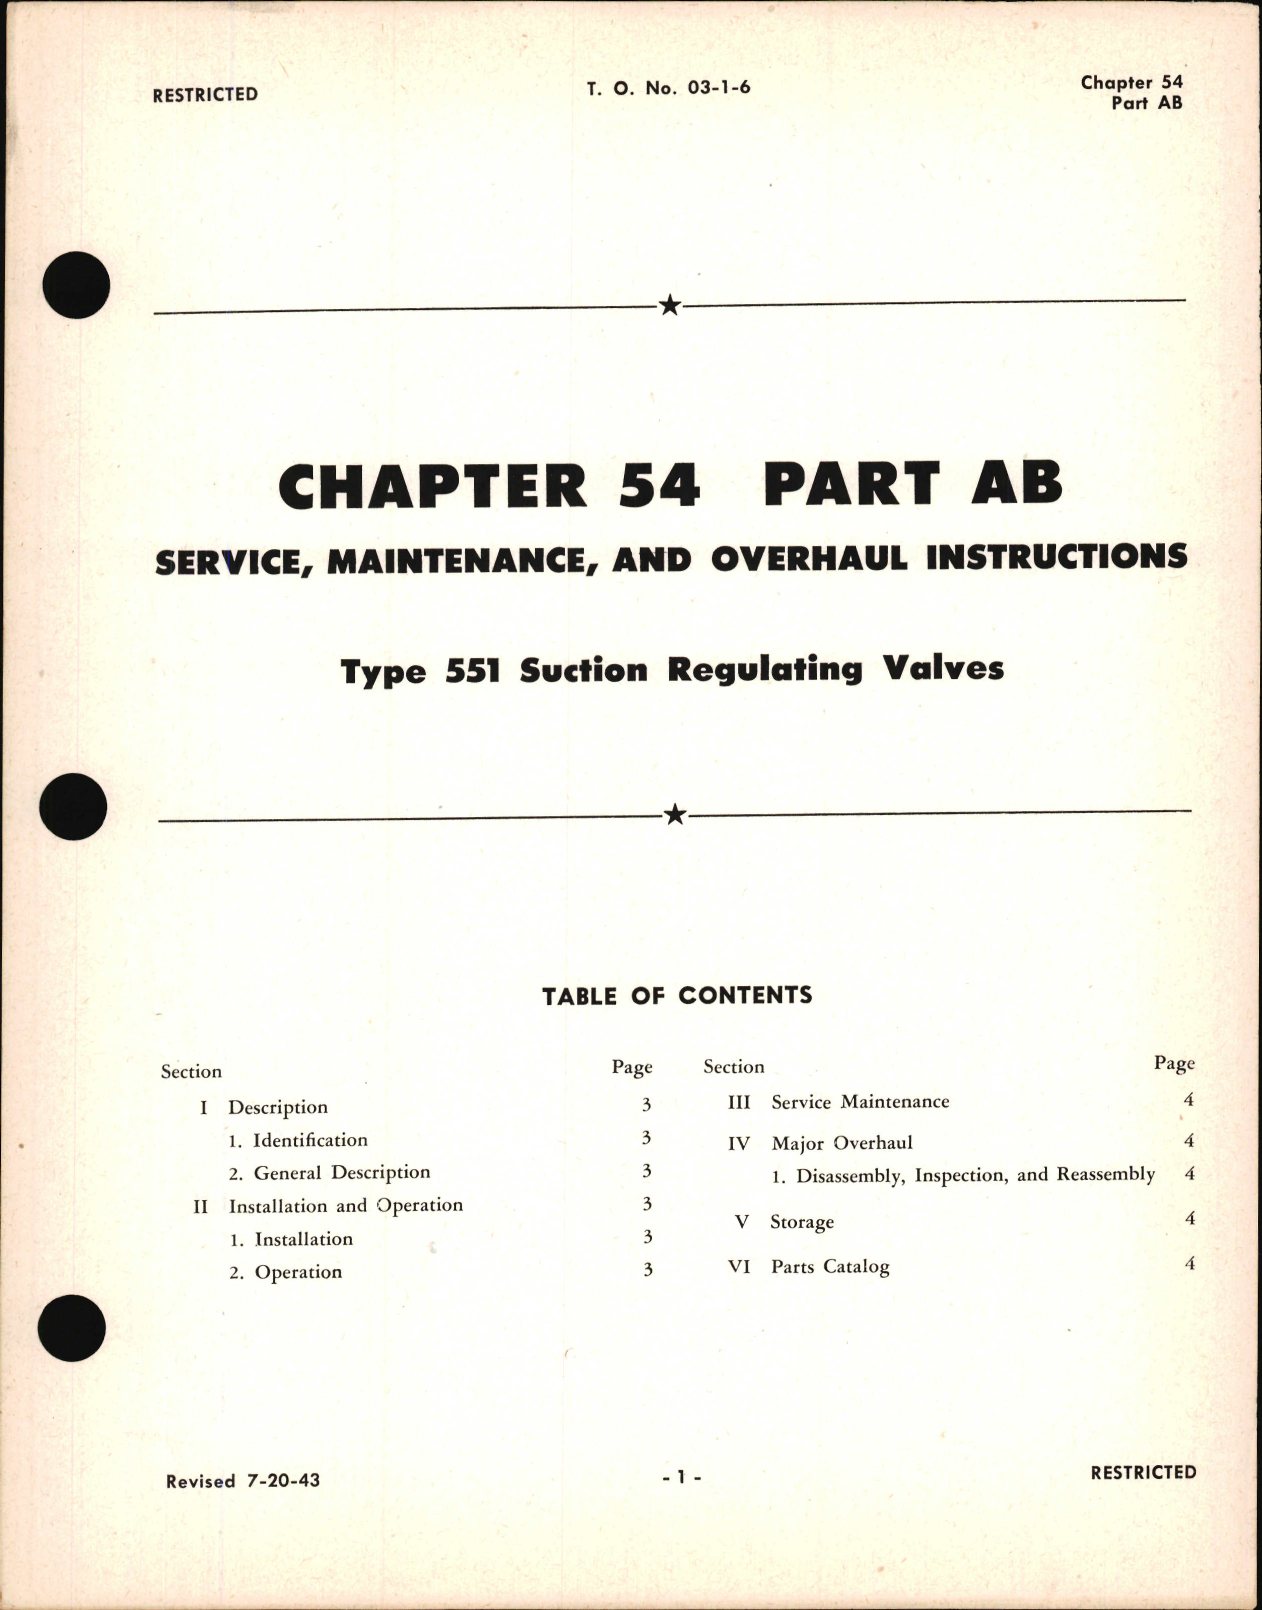 Sample page 1 from AirCorps Library document: Service, Maintenance and Overhaul Instructions for Suction Regulating Valves, Type 551, Ch 54 Part AB